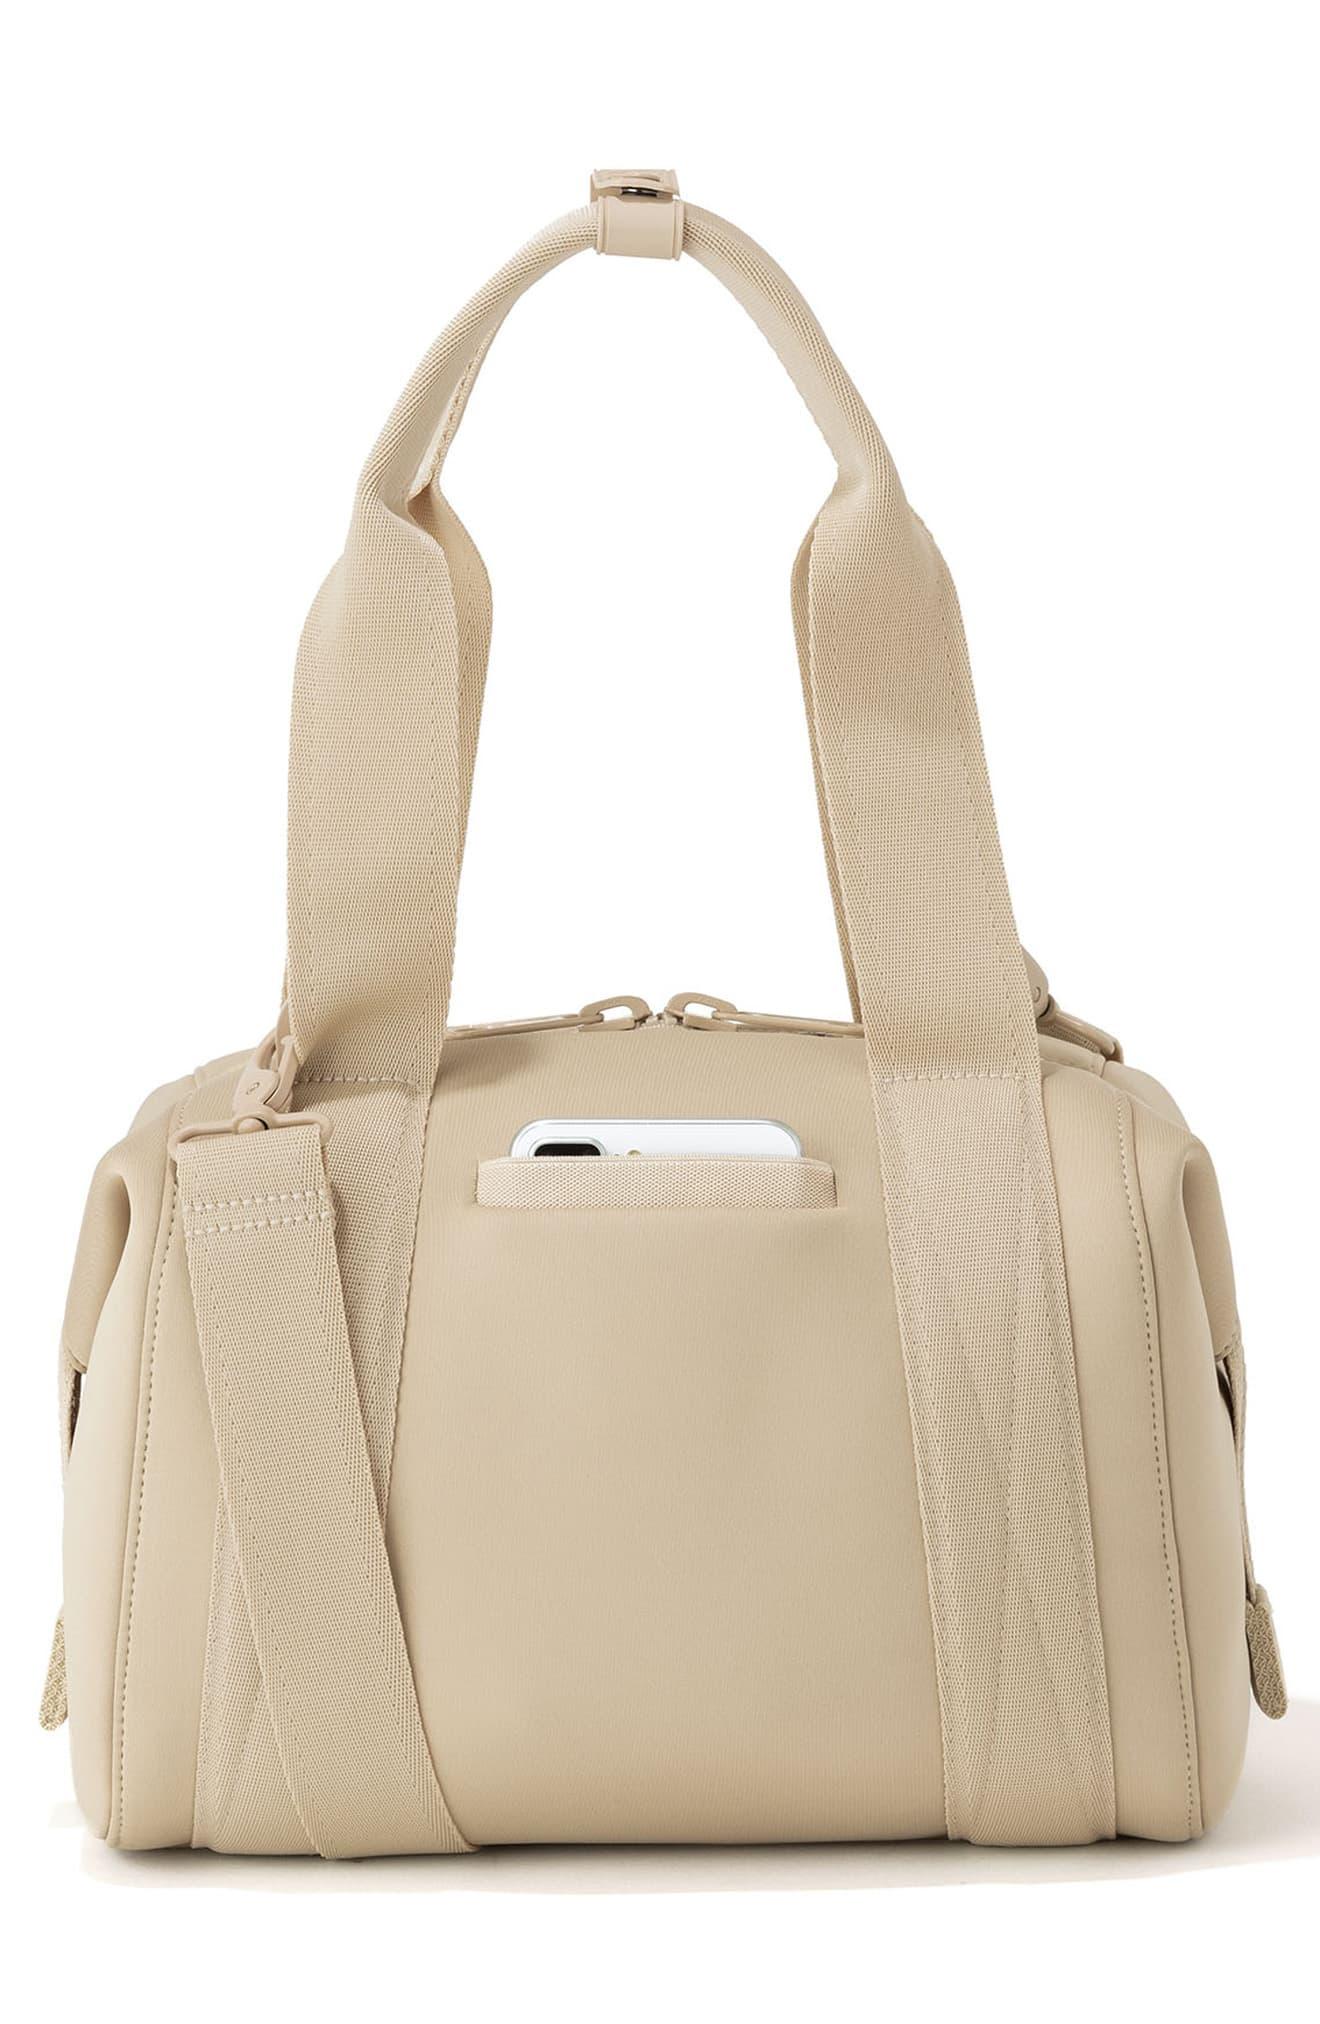 Dagne Dover 365 Small Landon Carryall Duffle Bag in Natural - Lyst